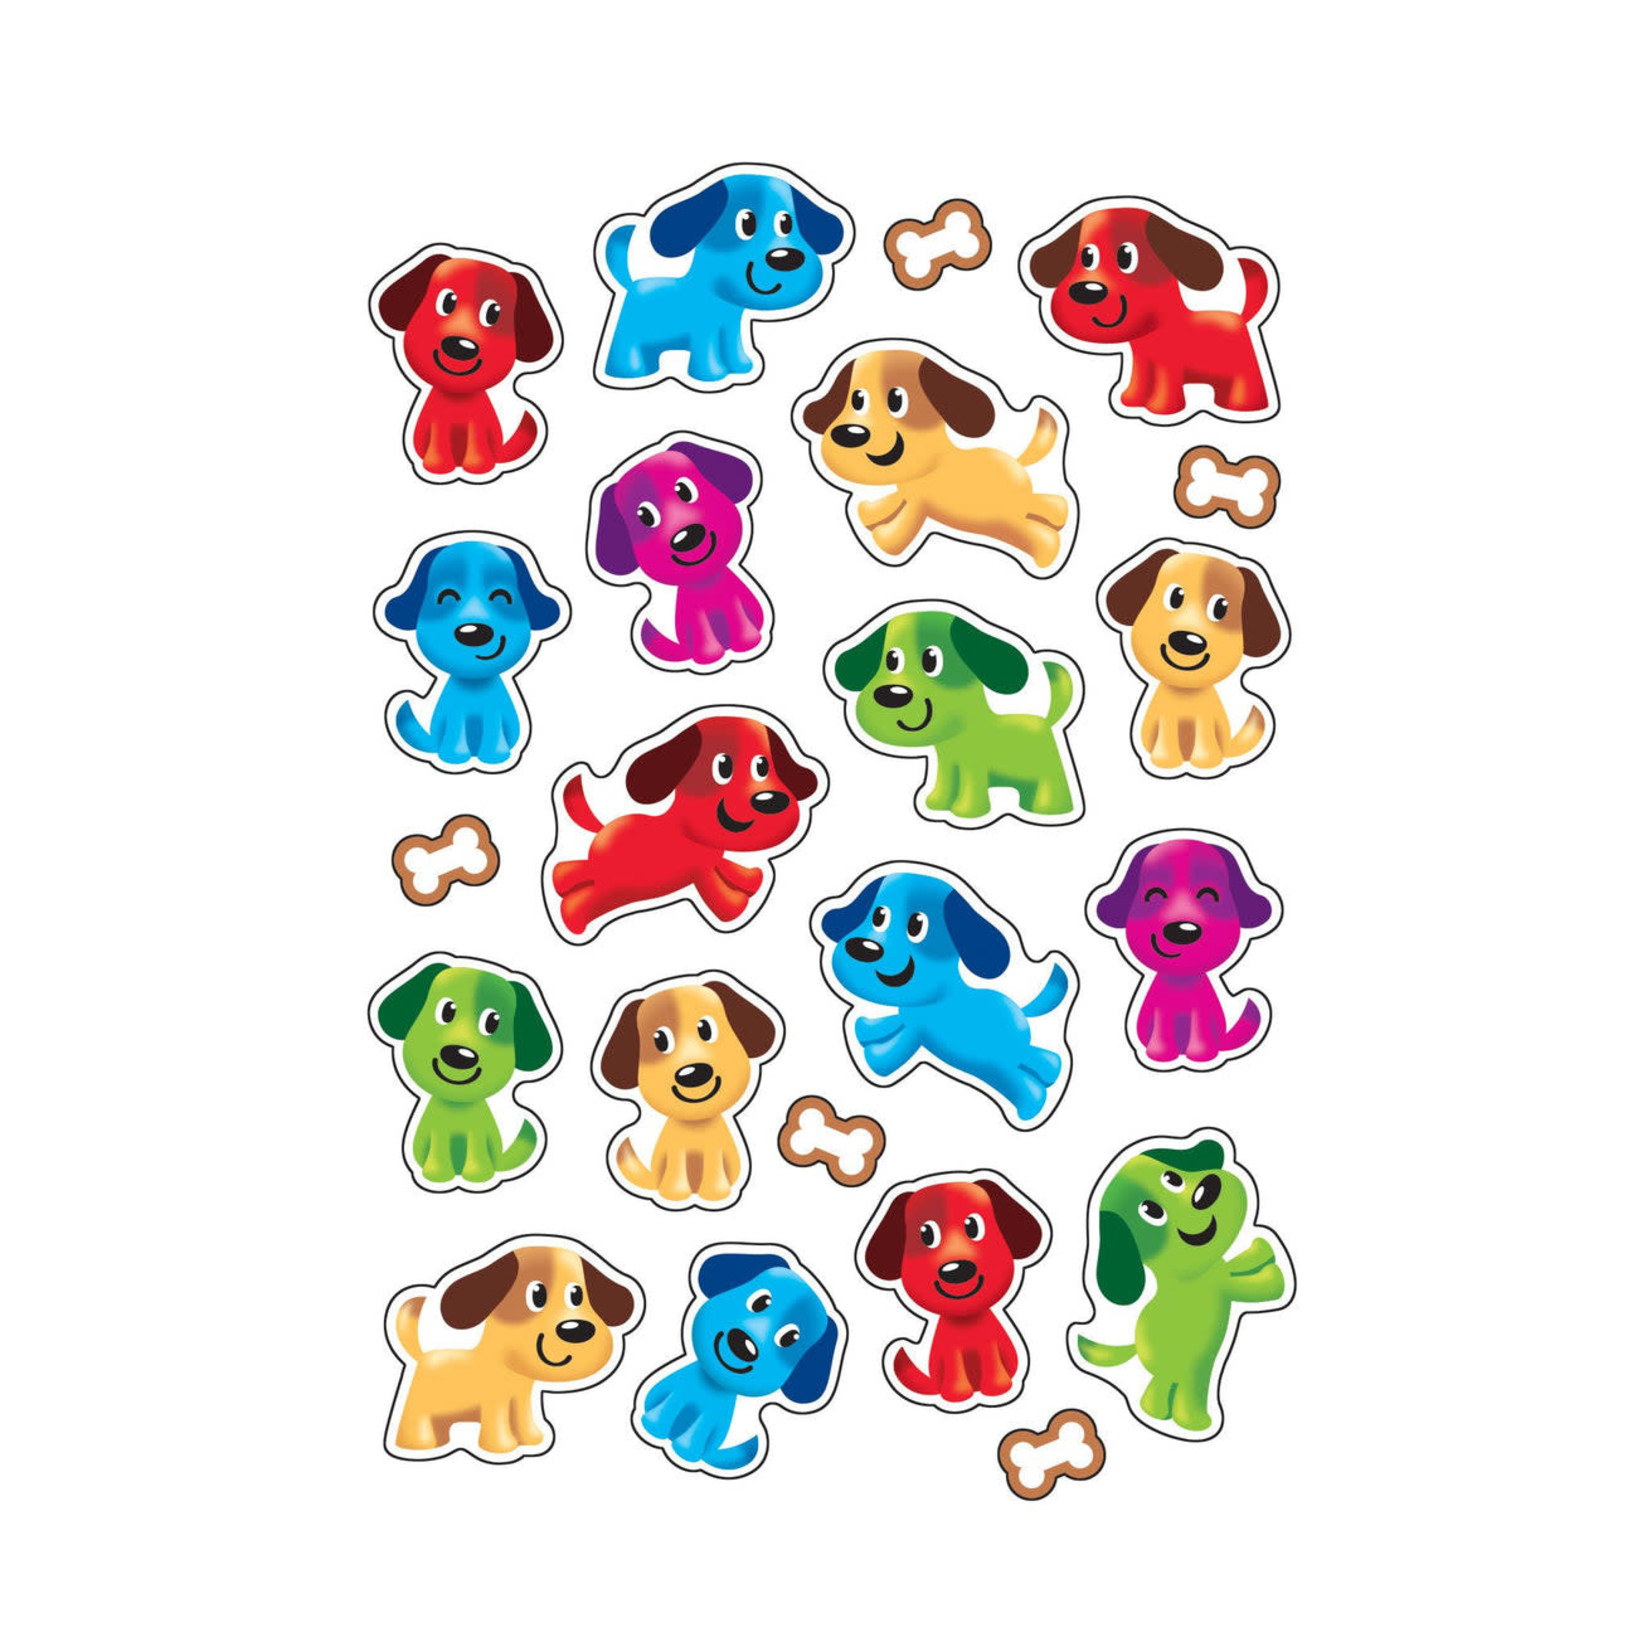 TREND ENTERPRISES INC Puppy Pals, Gingerbread scent Scratch 'n Sniff Stinky Stickers® – Mixed Shapes